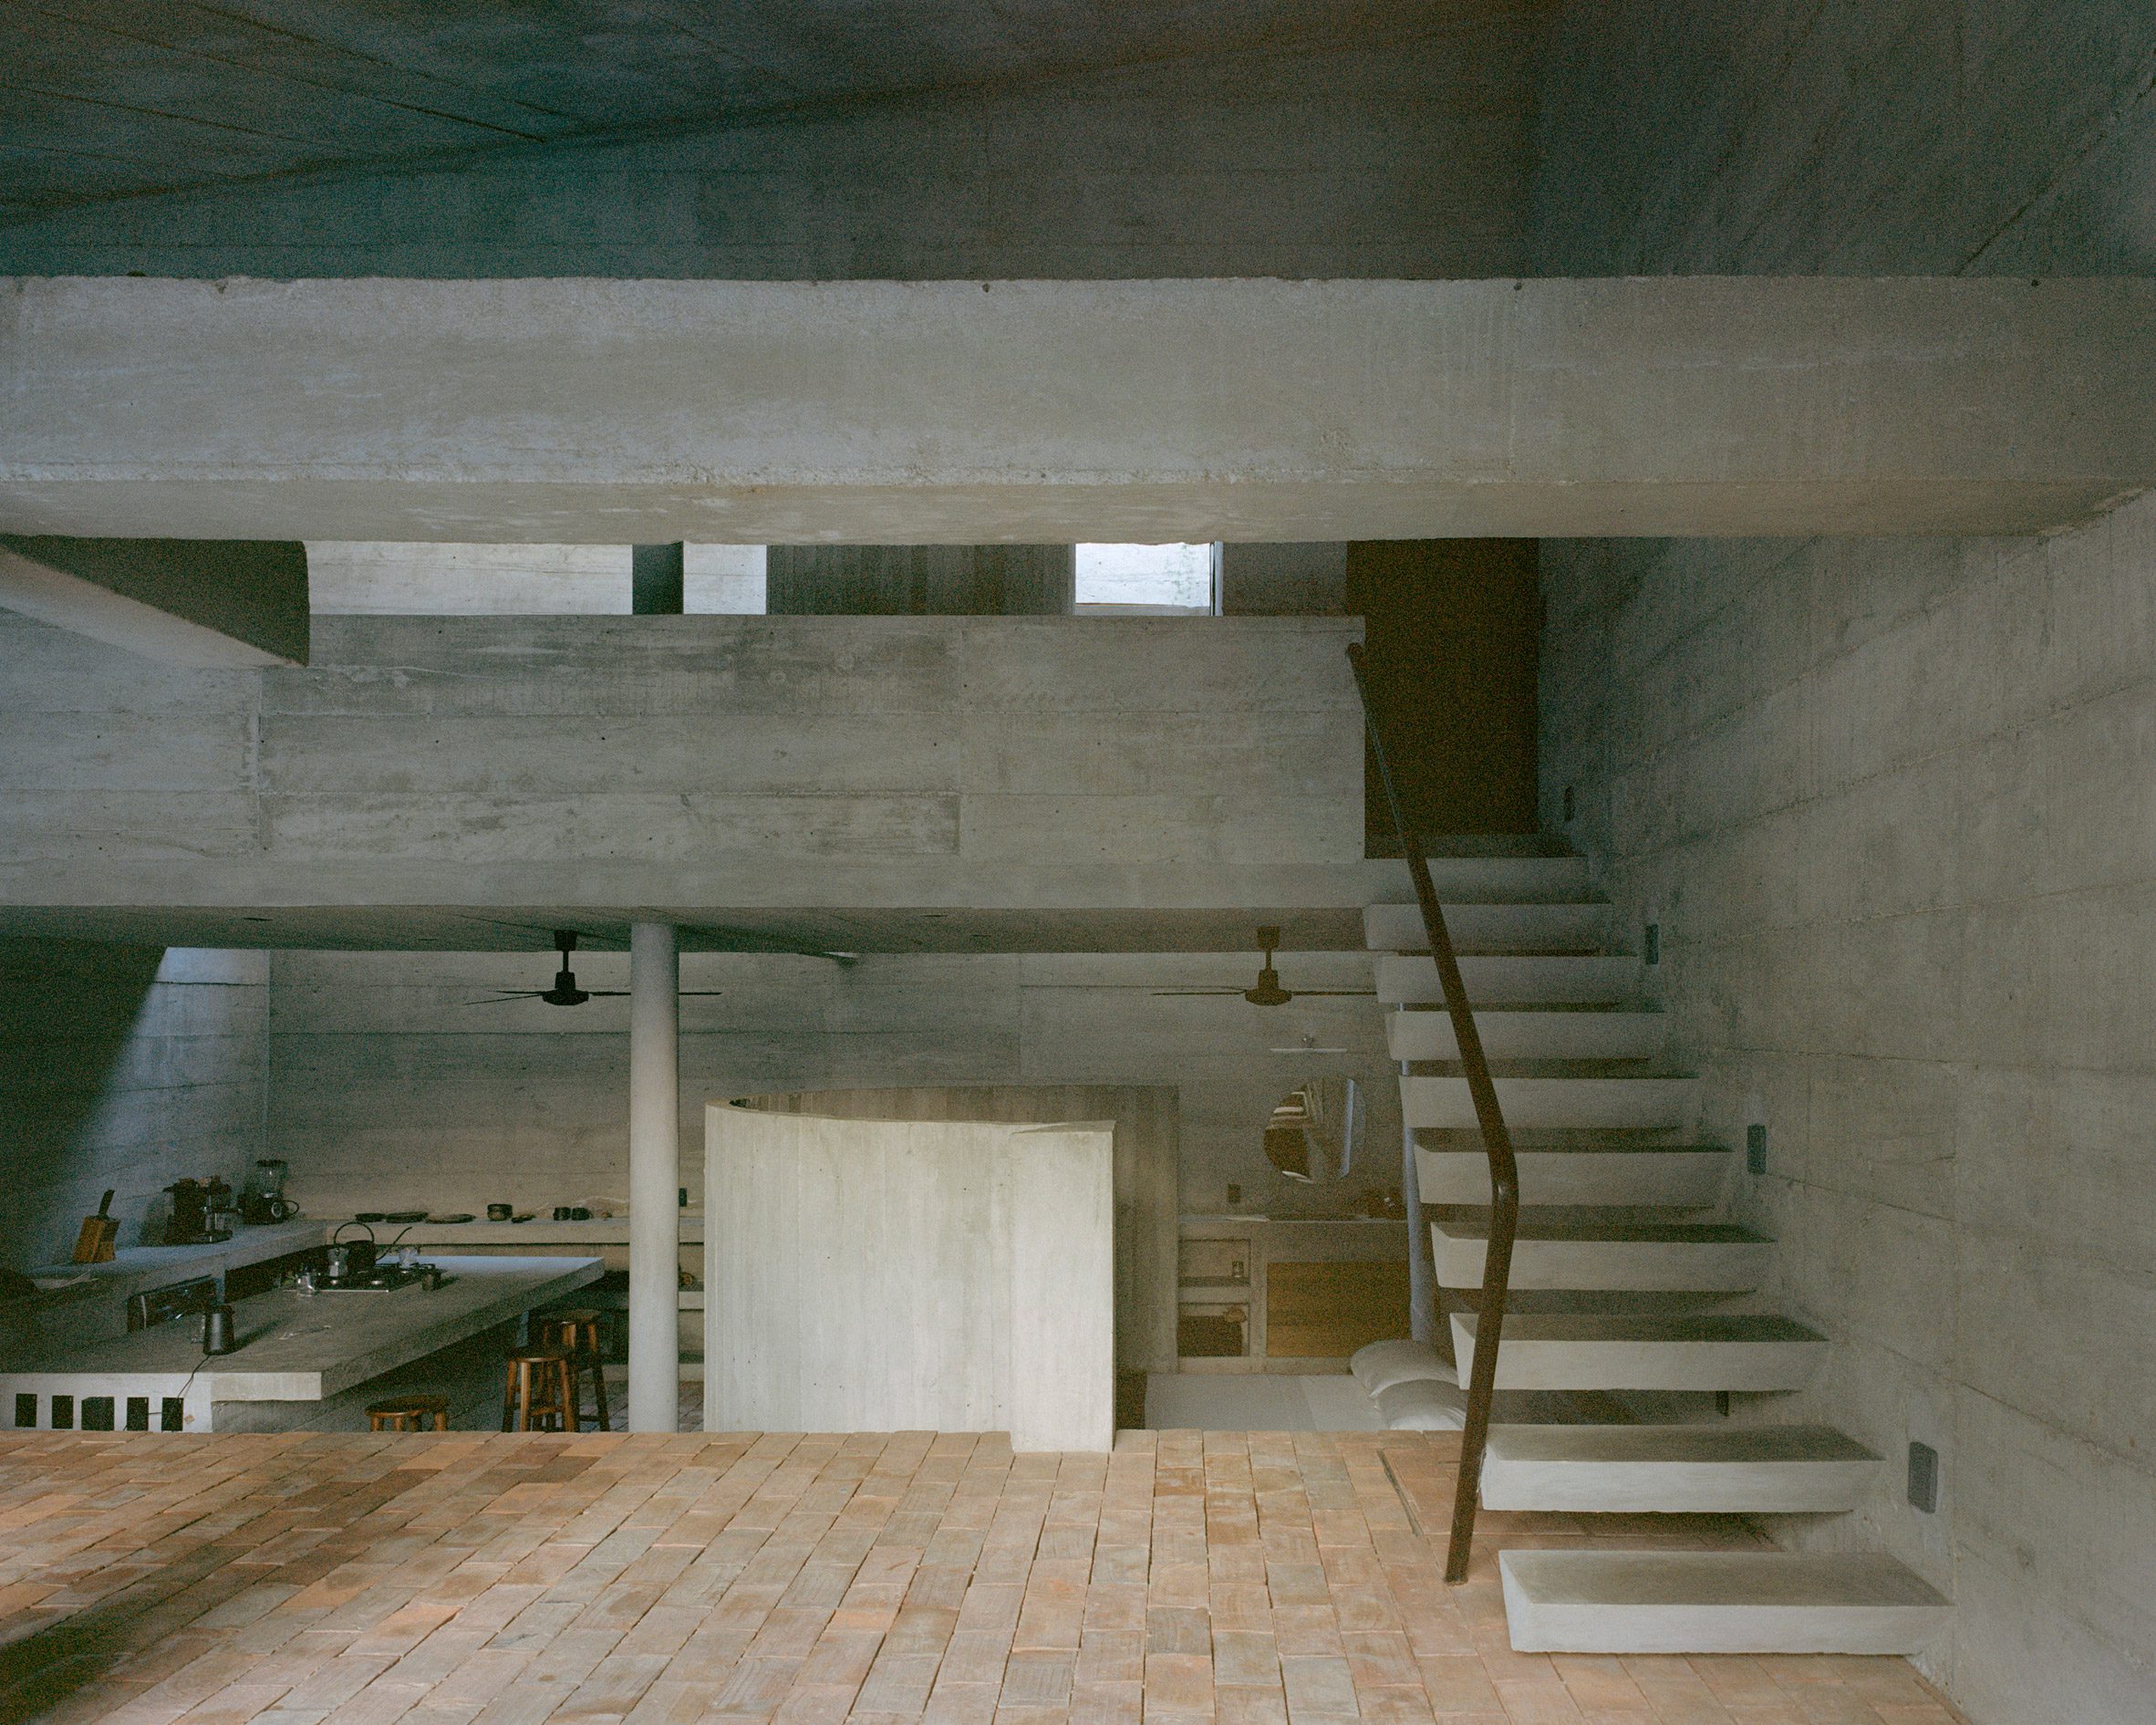 A concrete staircase that leads to a loft